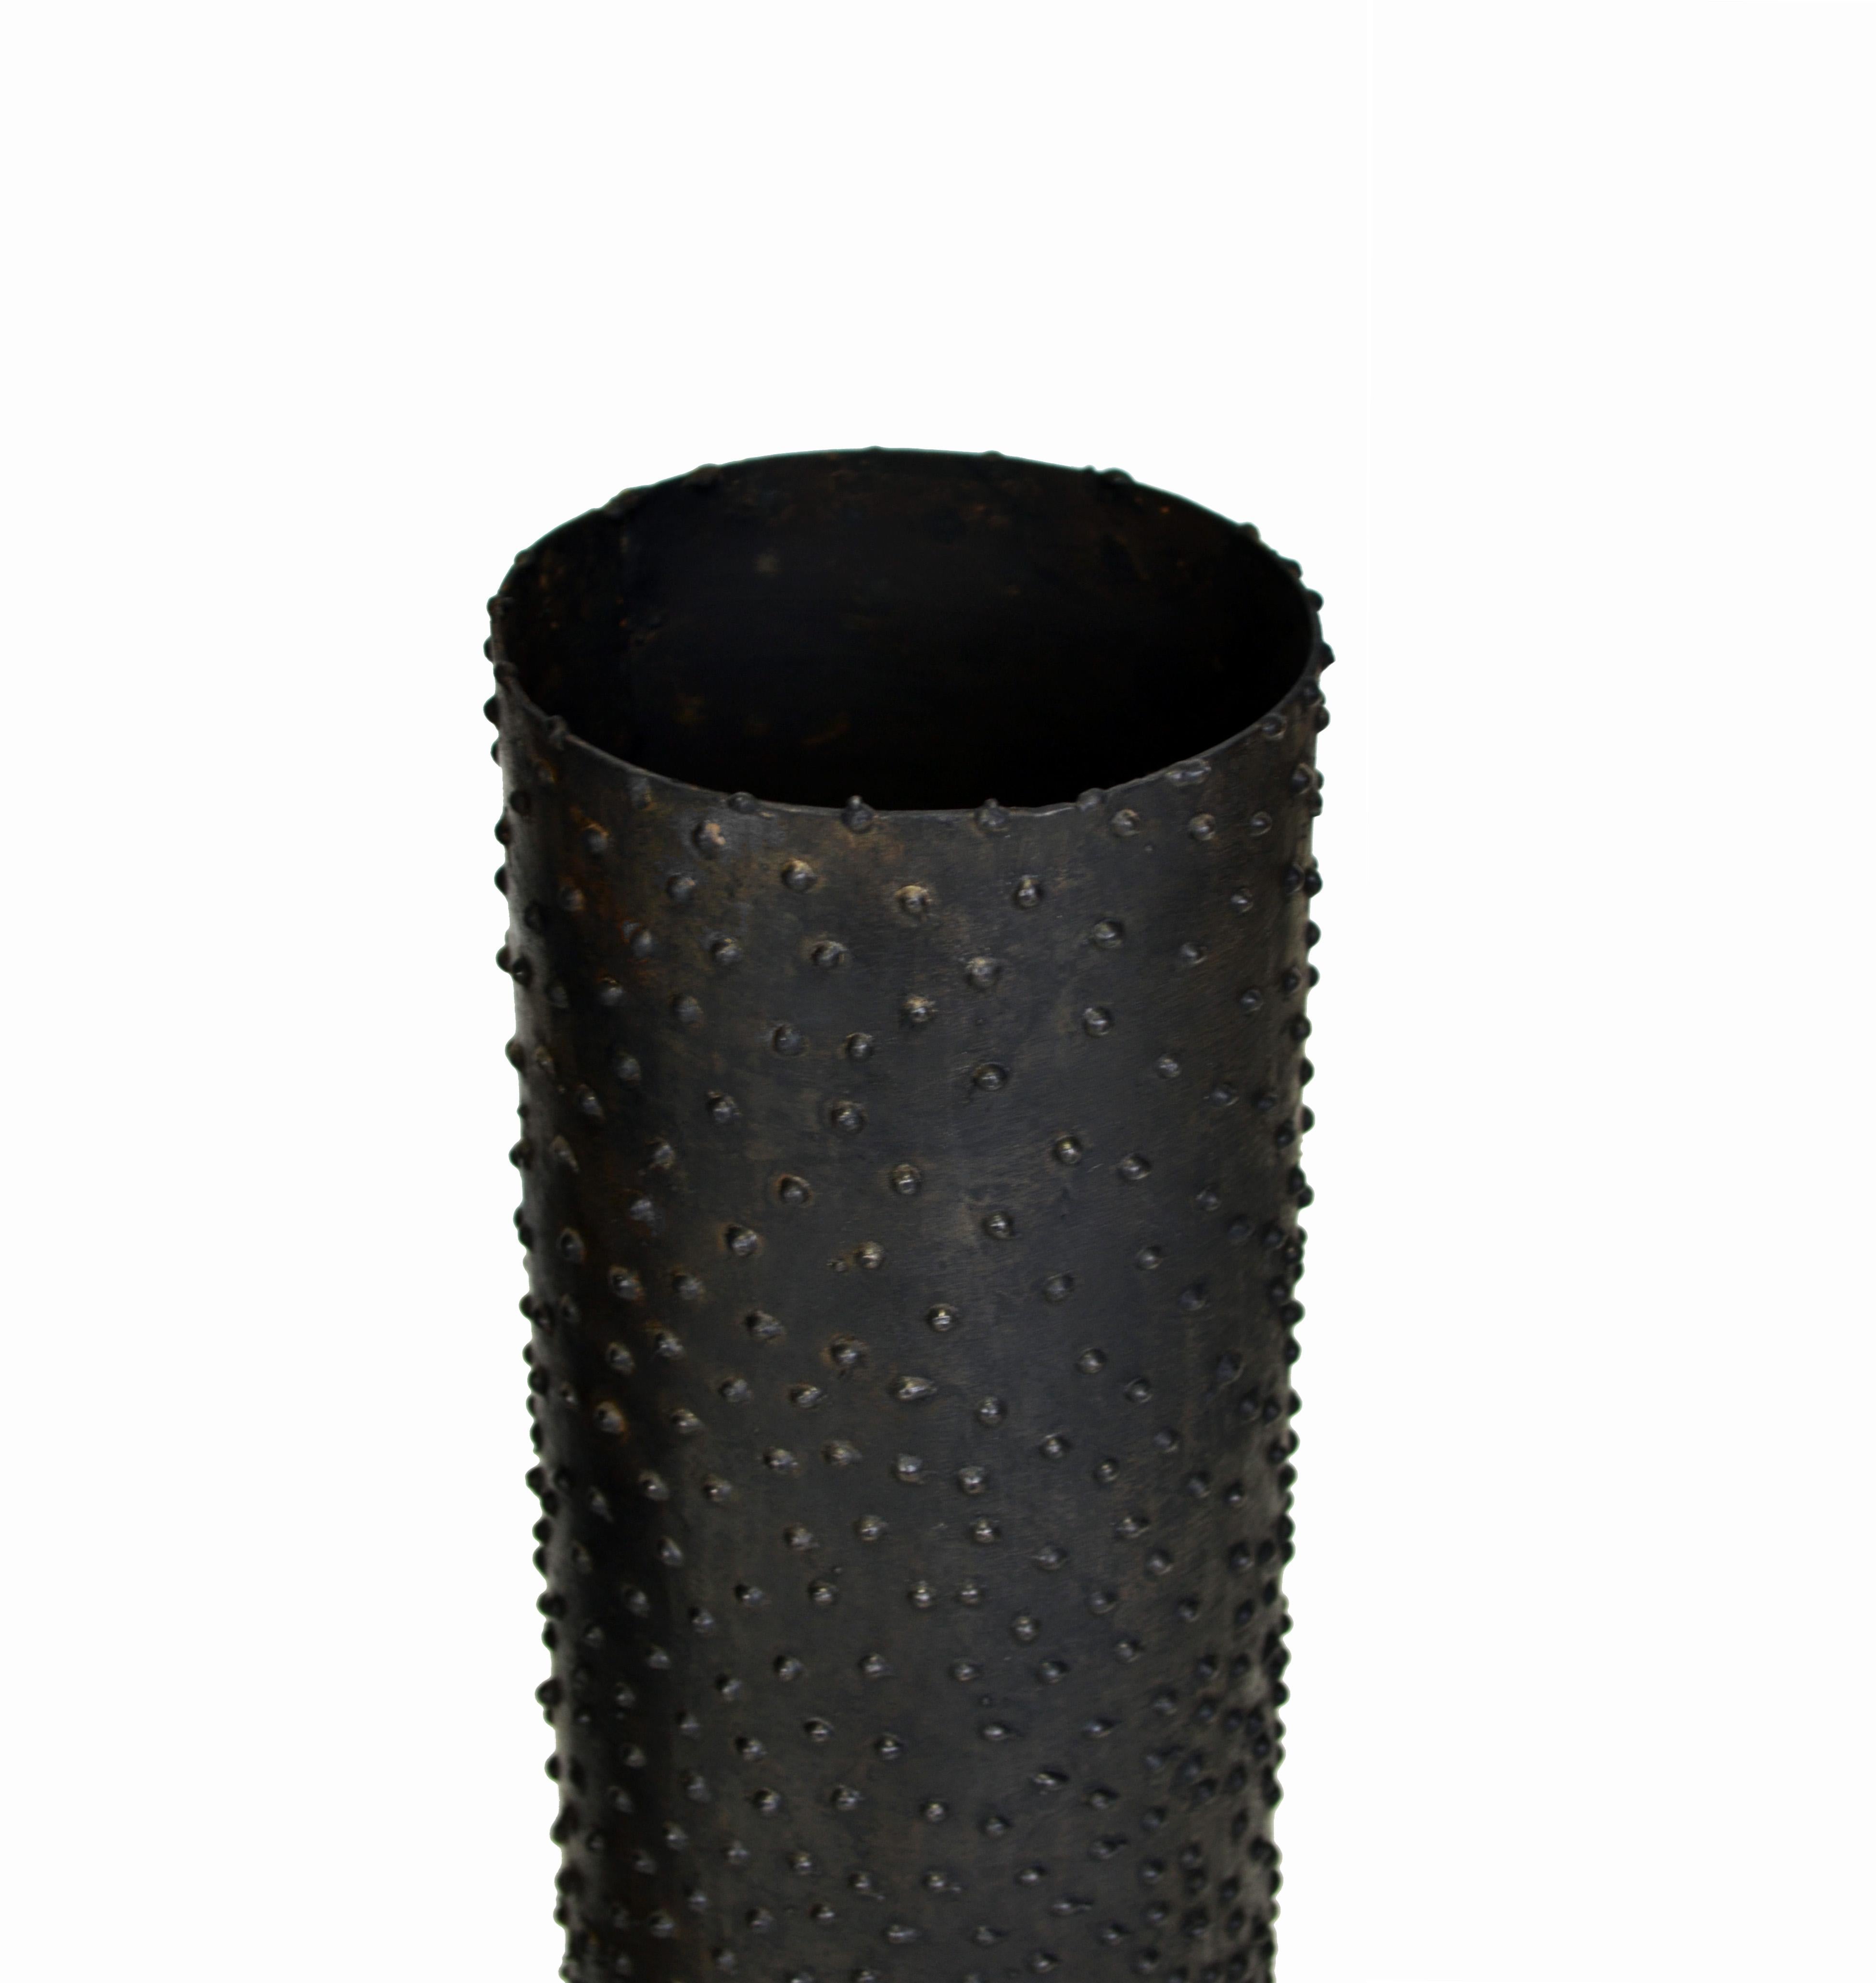 Modern Vessel Dotted Handcarved Vase Bumps Rough Textured Blackened Steel Waxed 